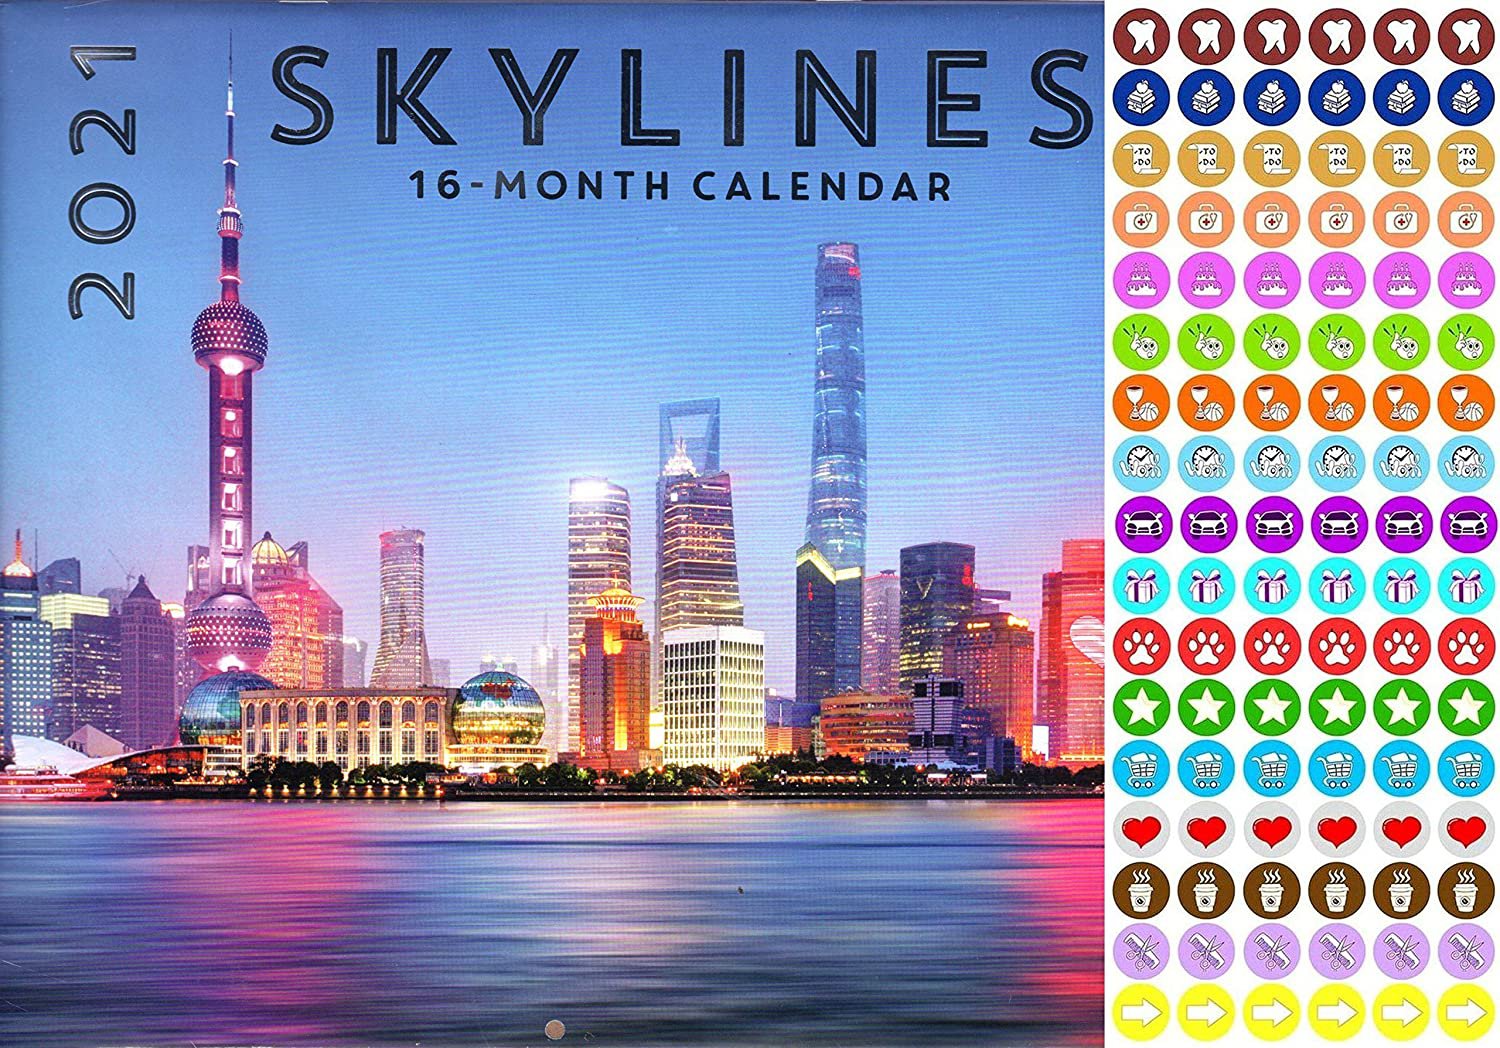 2021 16 Month Wall Calendar - Skylines - with 100 Reminder Stickers